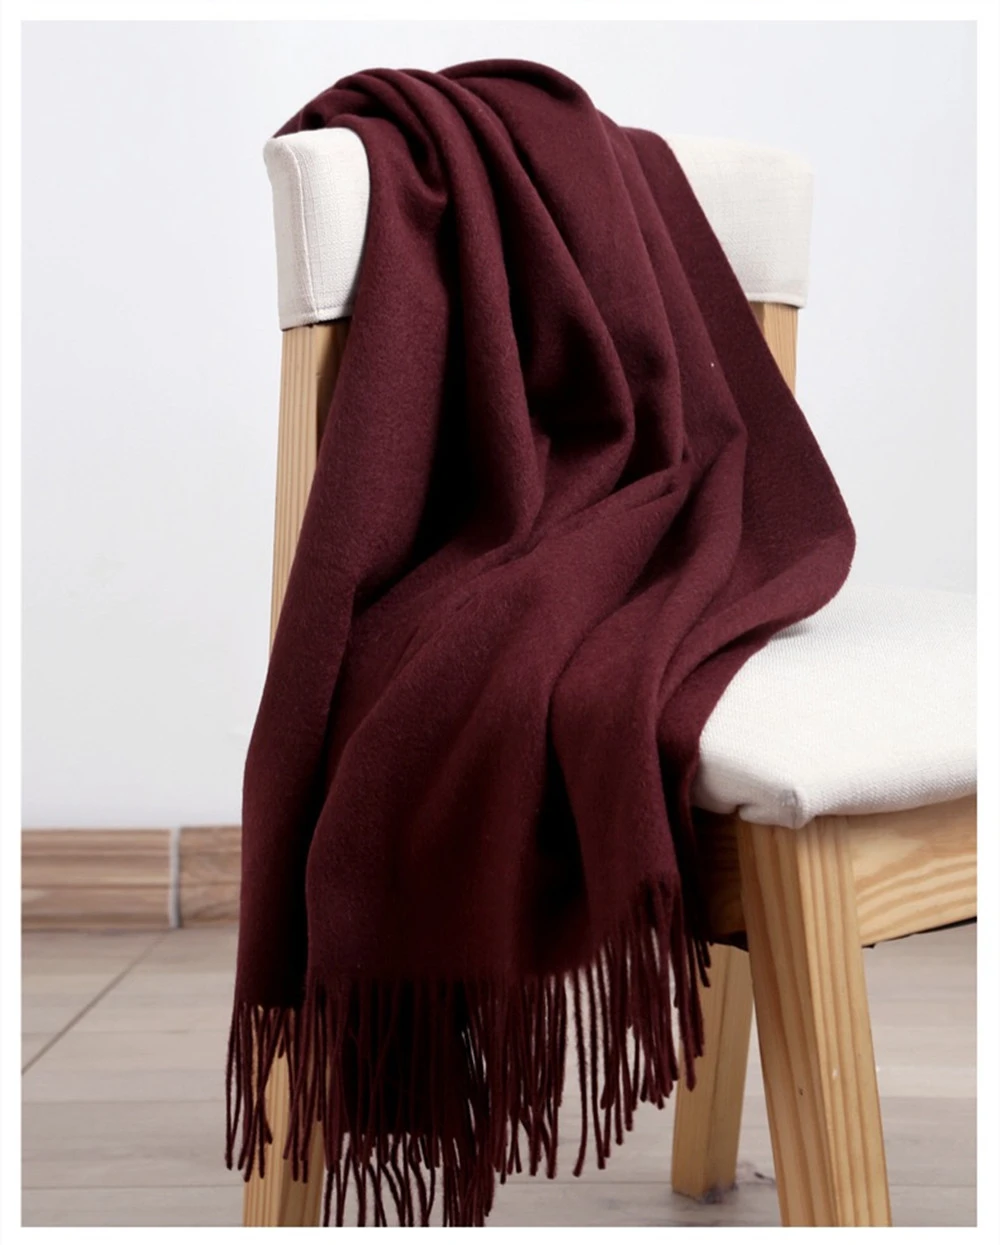 Hot sale solid color 100% pure wool winter cashmere shawl scarf